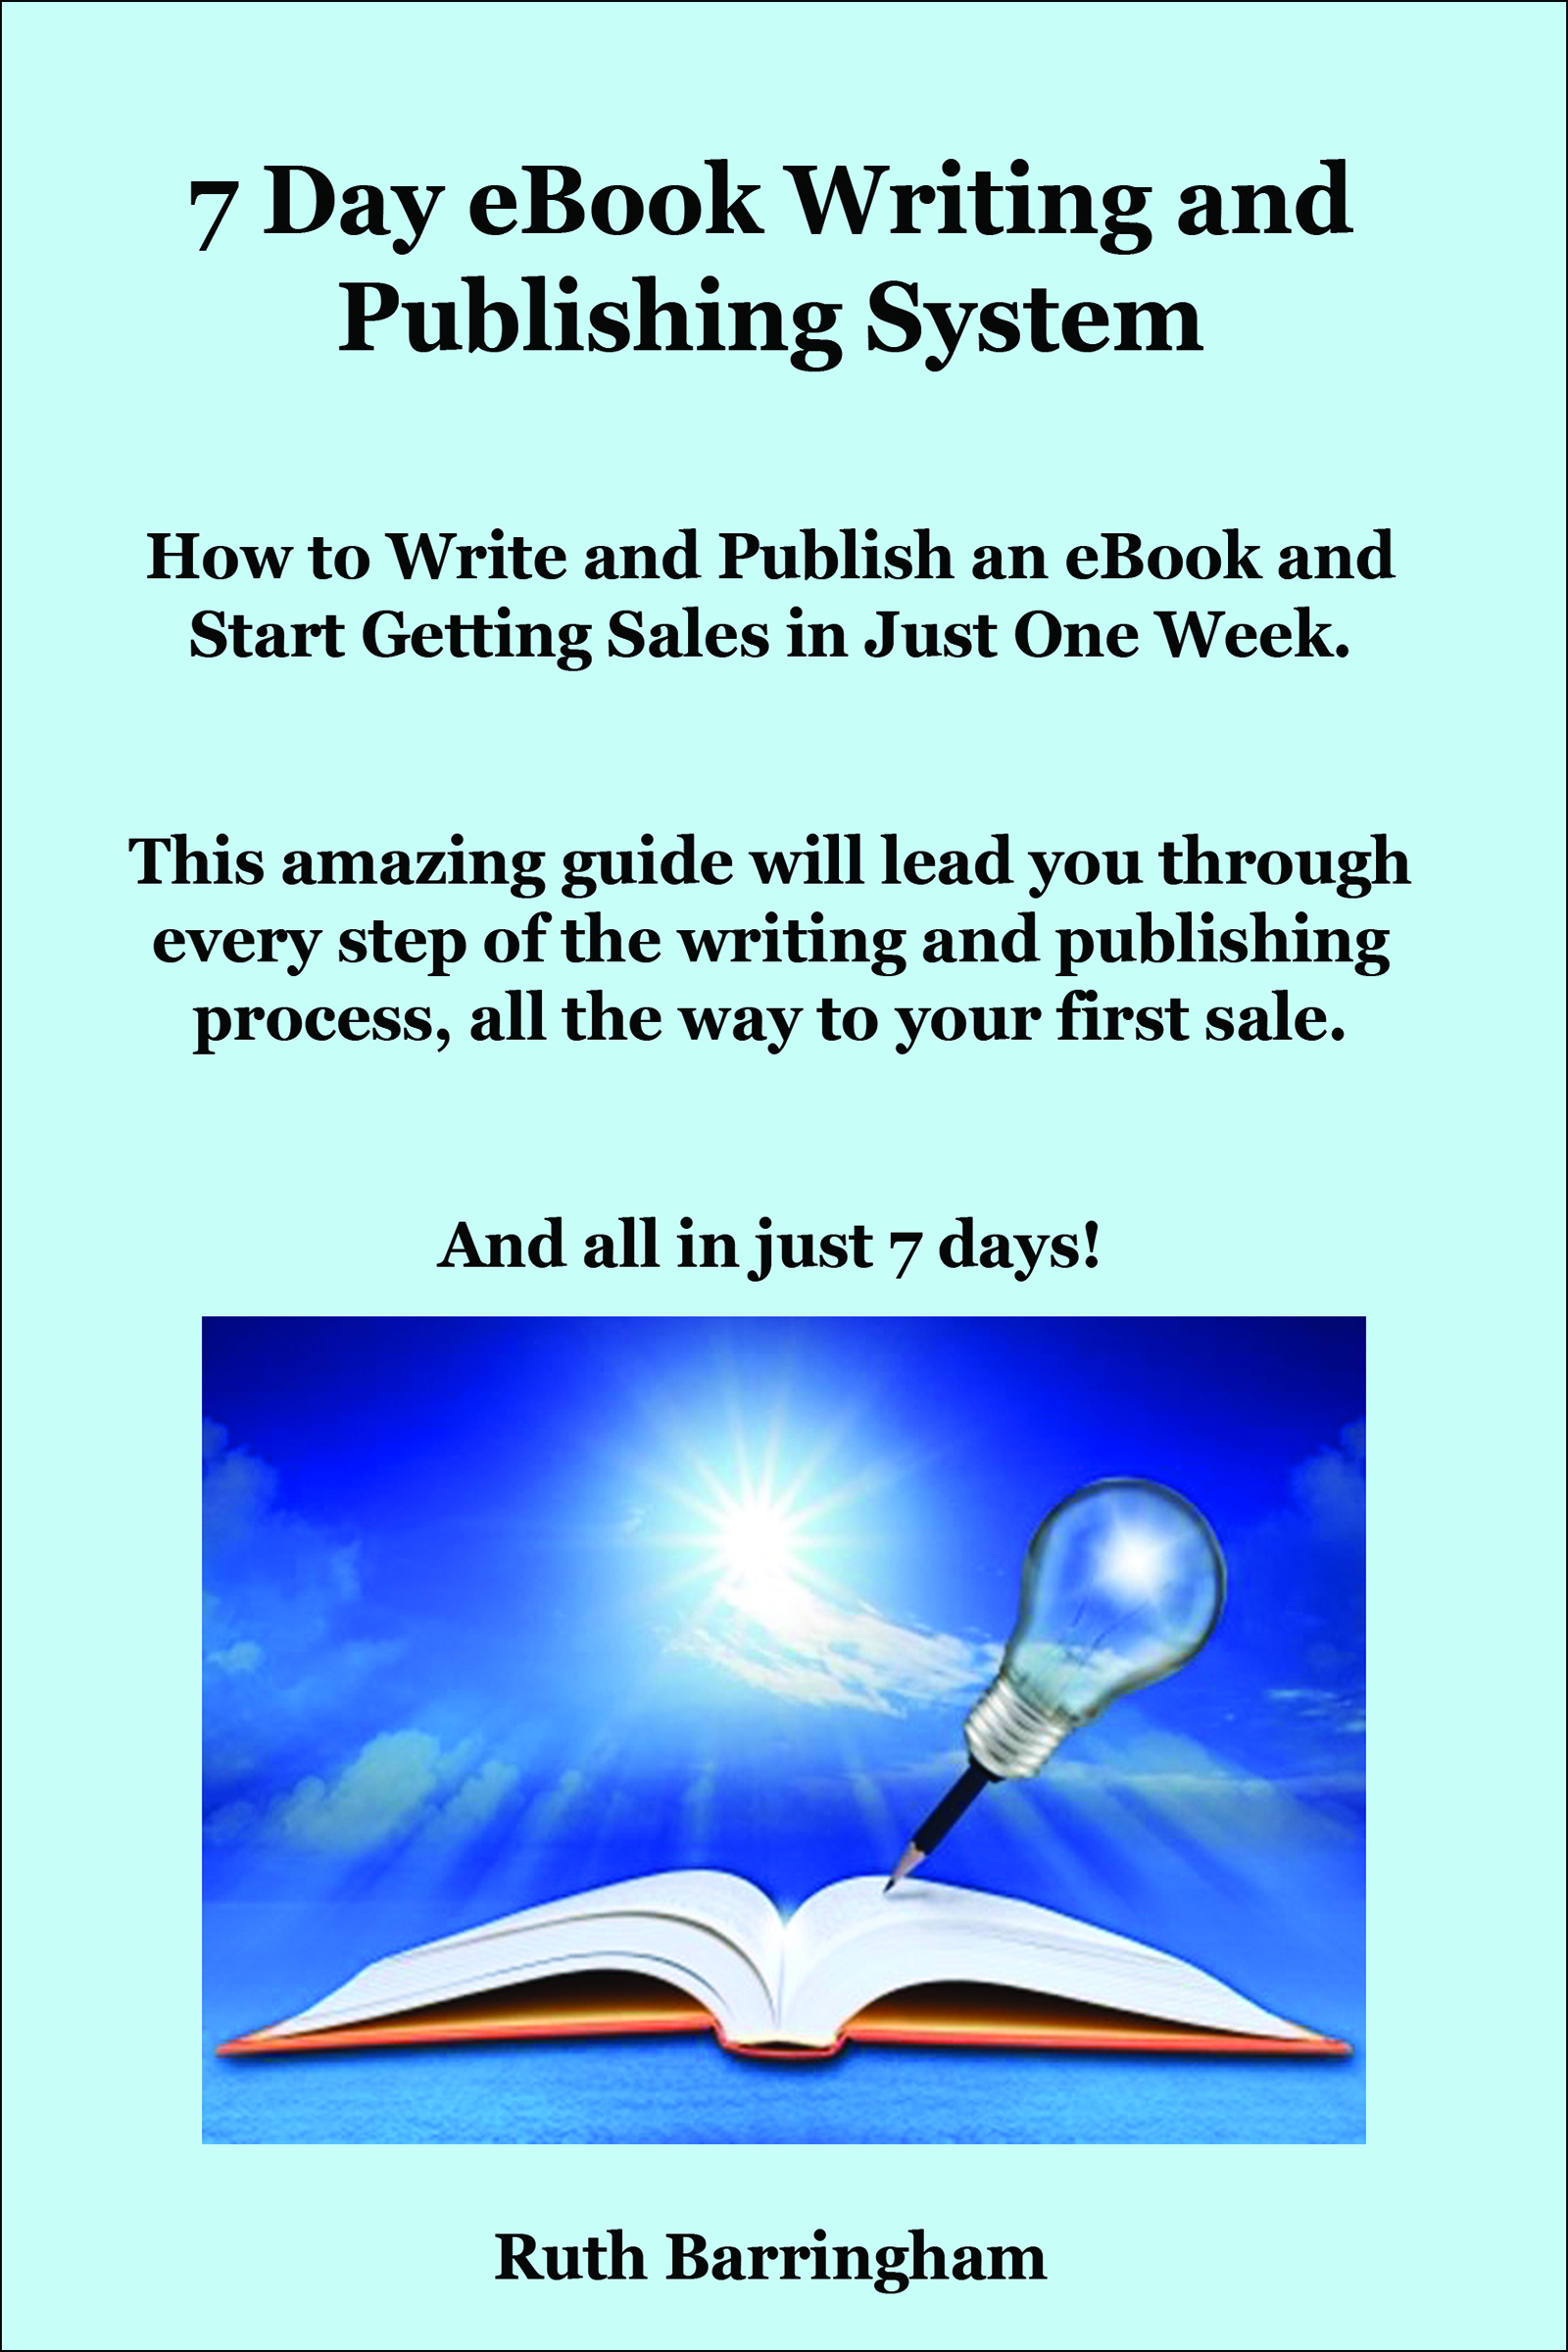 7 Day eBook Writing and Publishing System